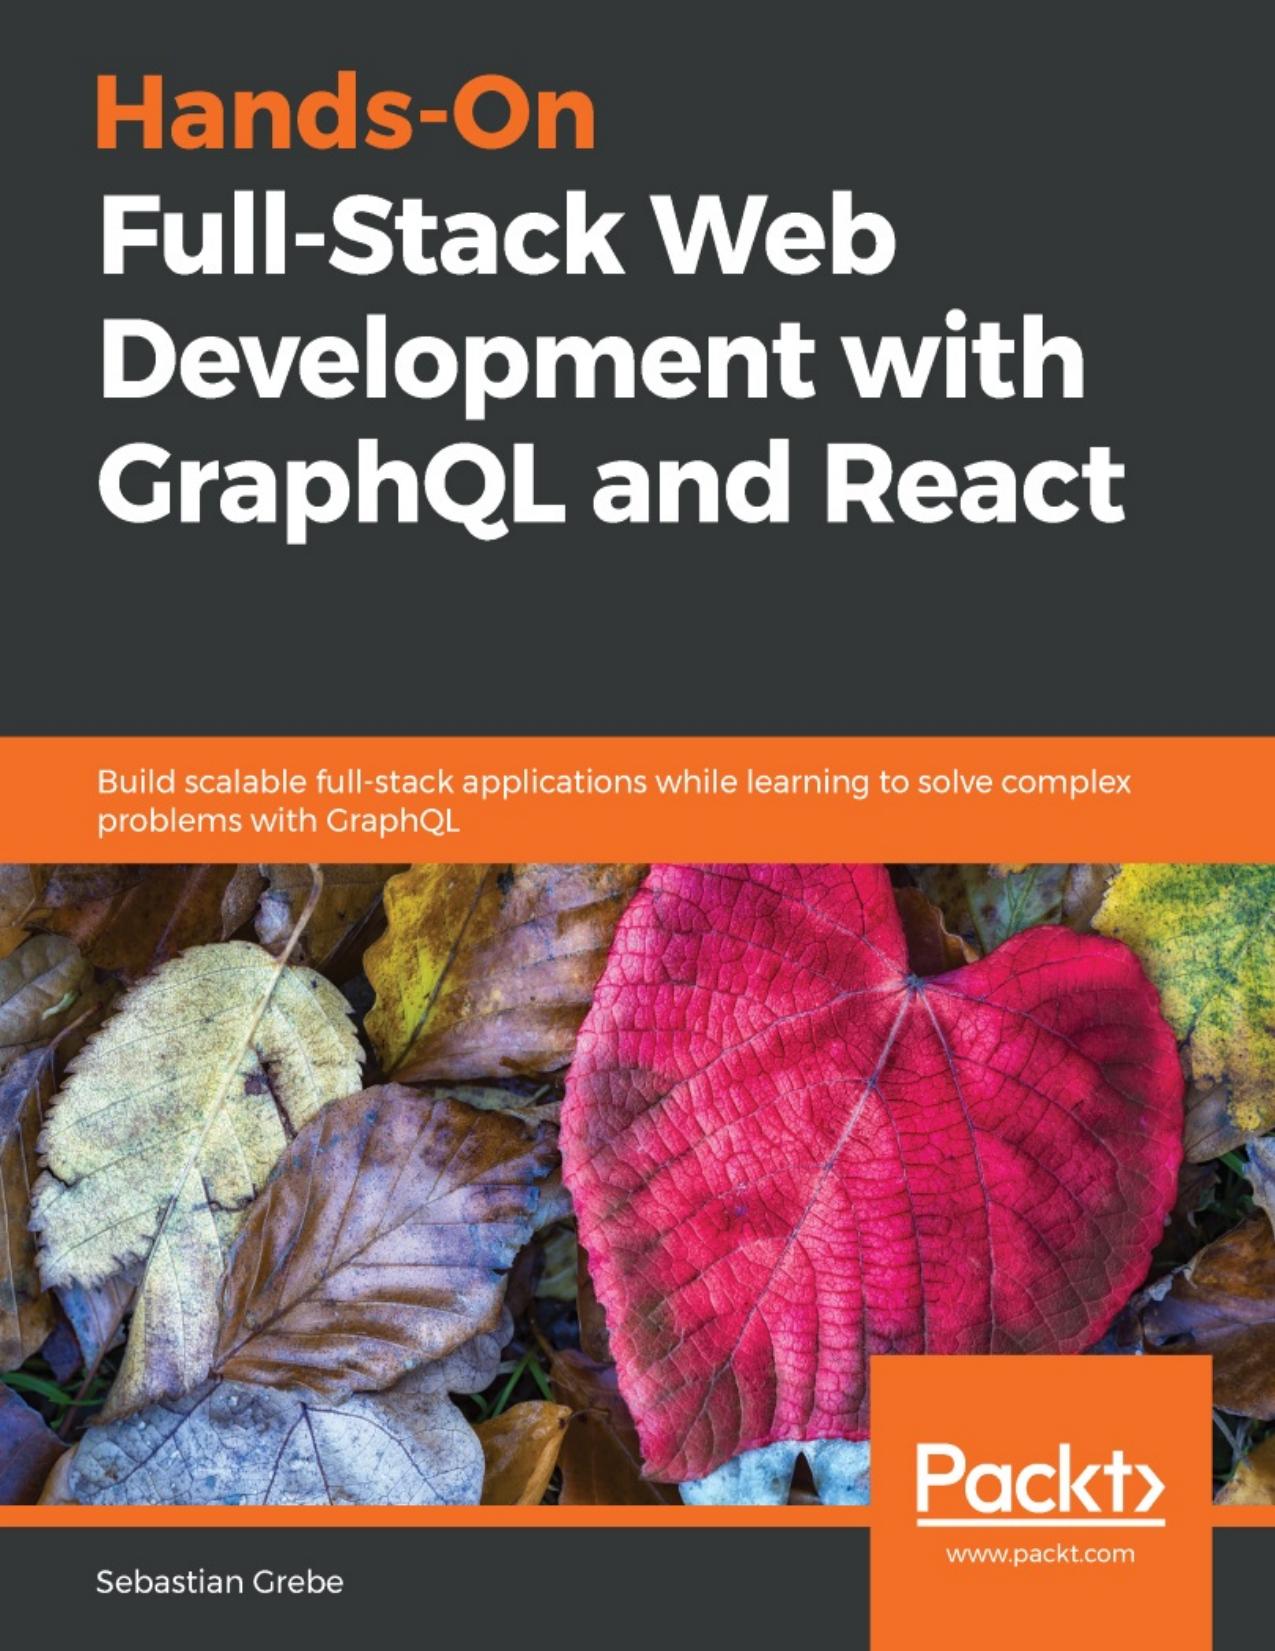 Hands-On Full-Stack Web Development with GraphQL and React: Build Scalable Full-Stack Applications While Learning to Solve Complex Problems with GraphQL